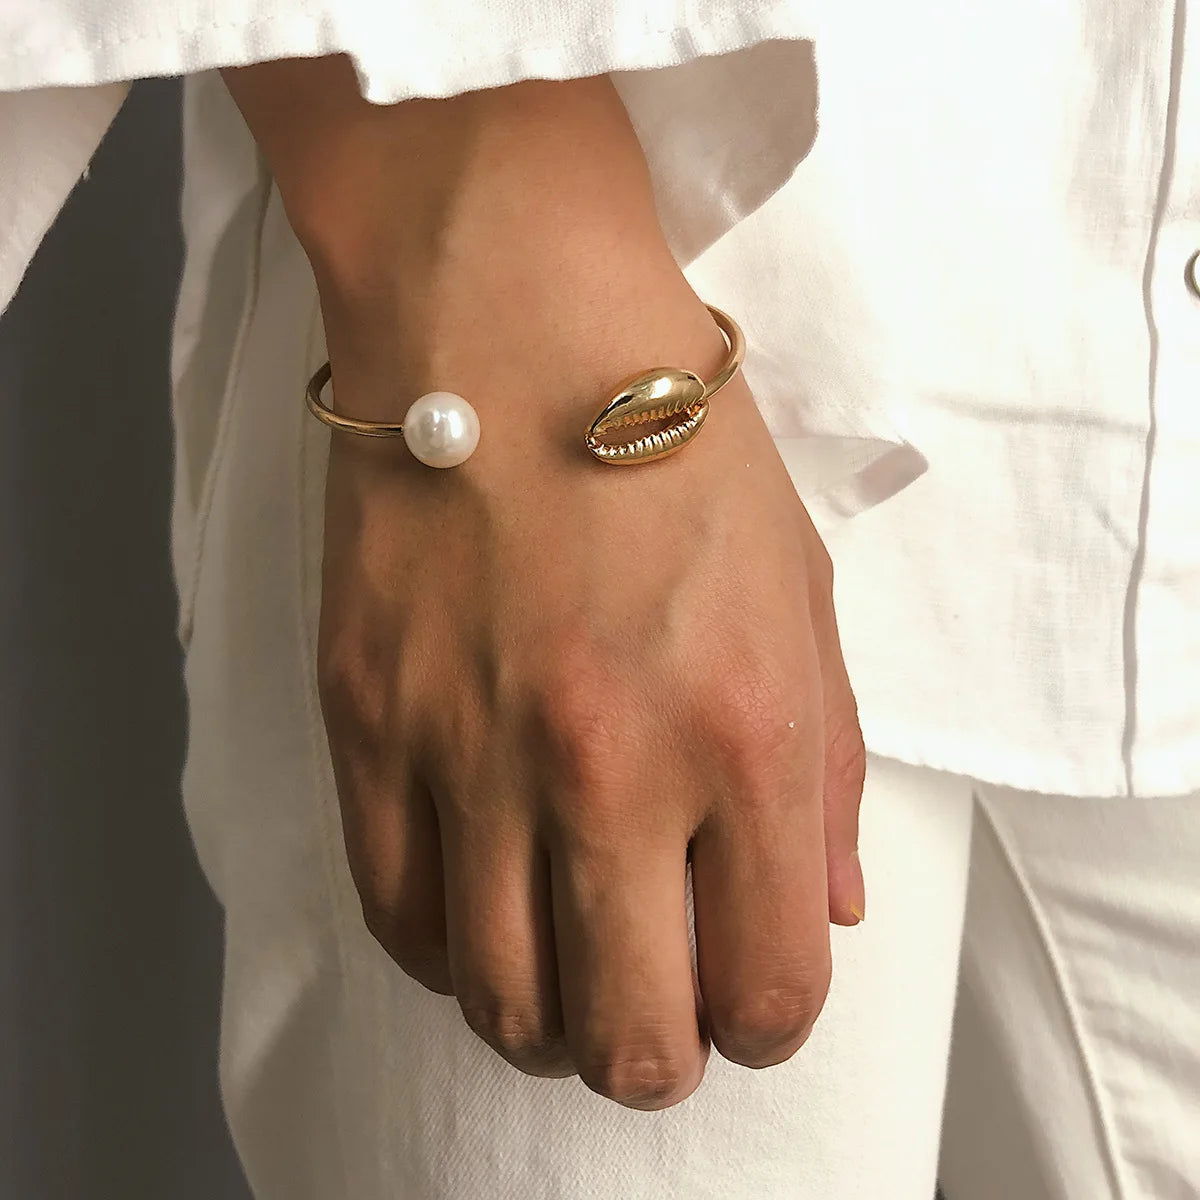 Gold Color Cowrie Shell Bracelets for Women Pearl Beads Charm Cuff Opening Bracelet Bohemian Beach Jewelry Mujer Pulseras - TaMNz